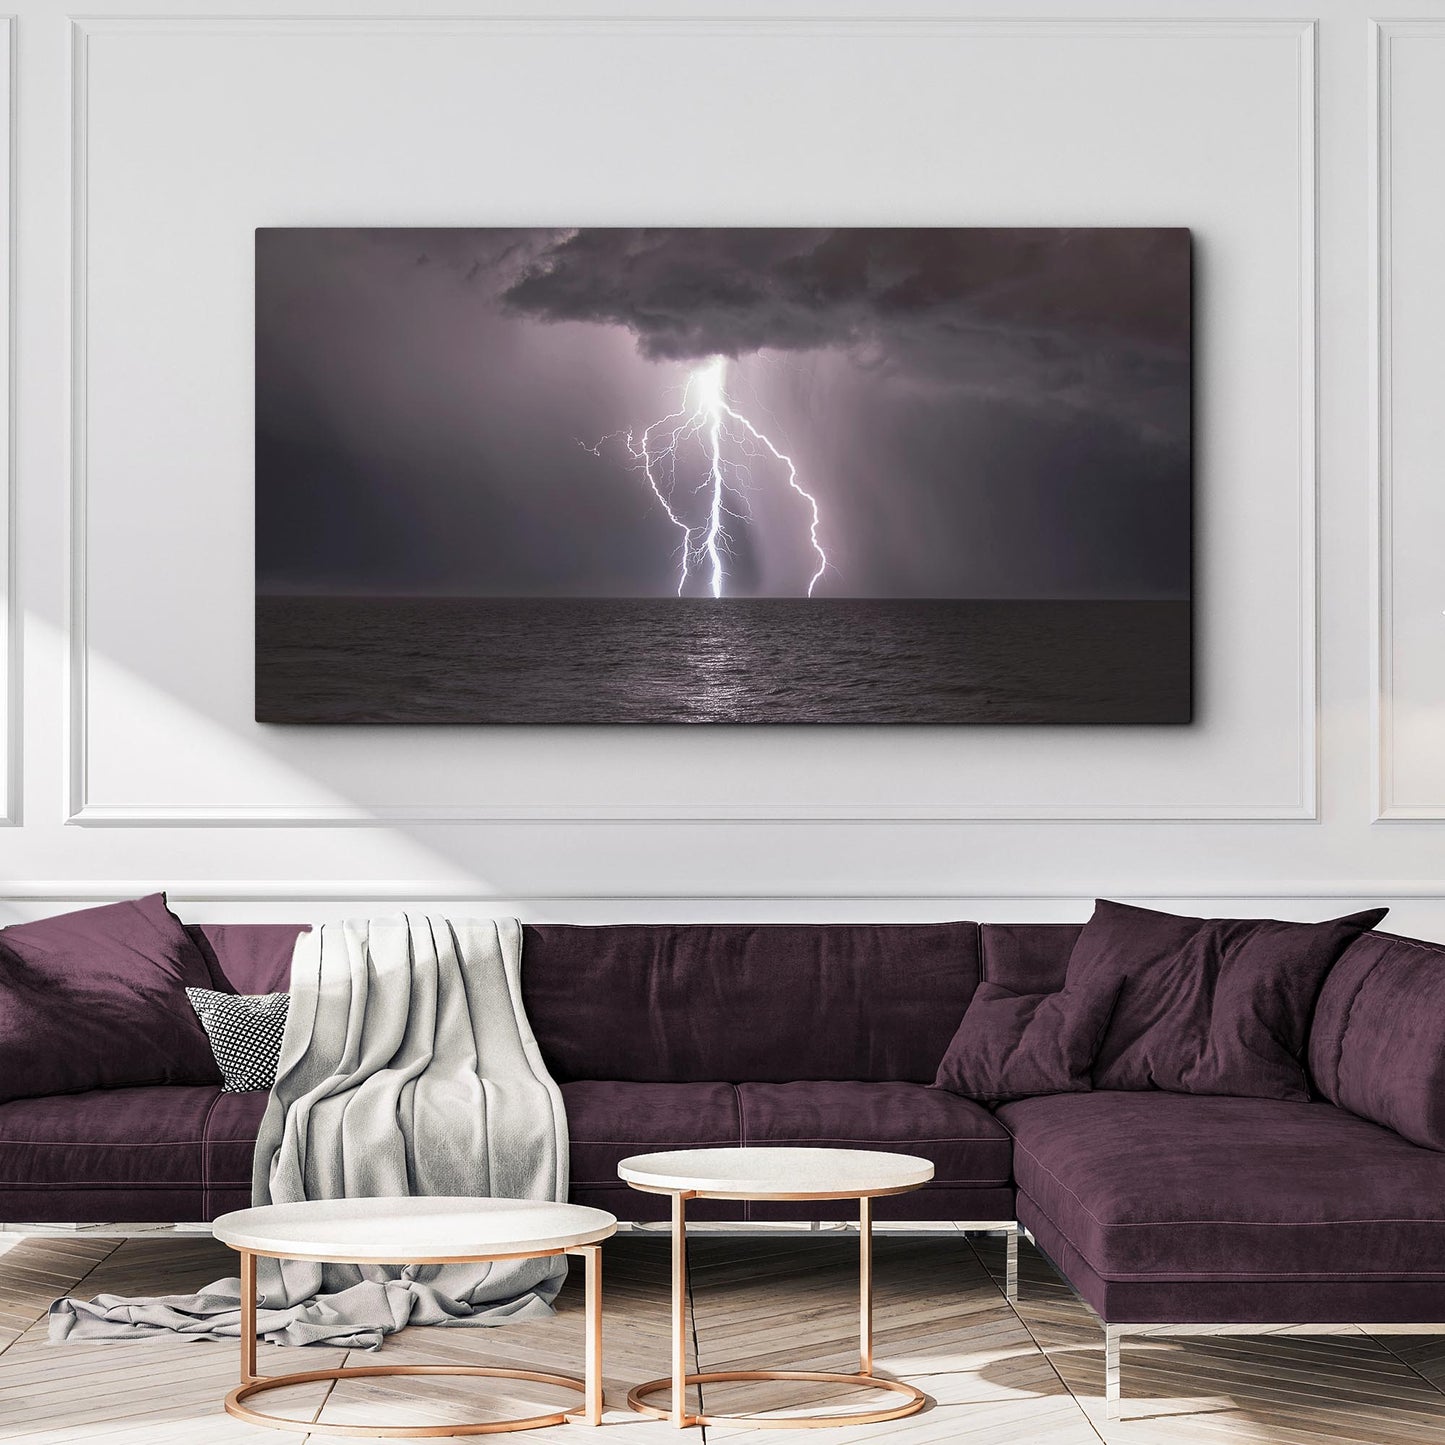 Ocean Thunder Storm Bolt Canvas Wall Art Style 2 - Image by Tailored Canvases